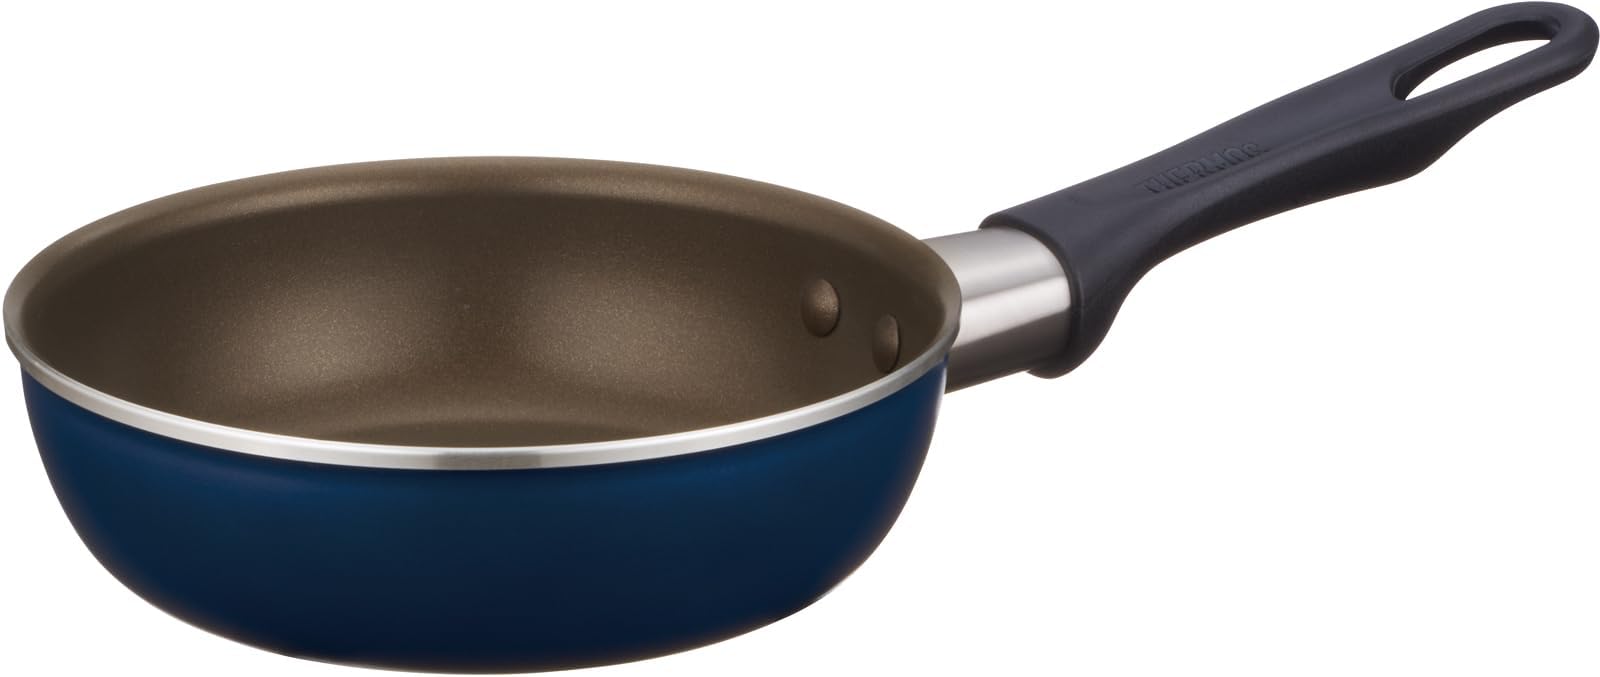 Thermos Durable Series 16Cm Frying Pan for Gas Fire Navy - Kfi-016 Nvy